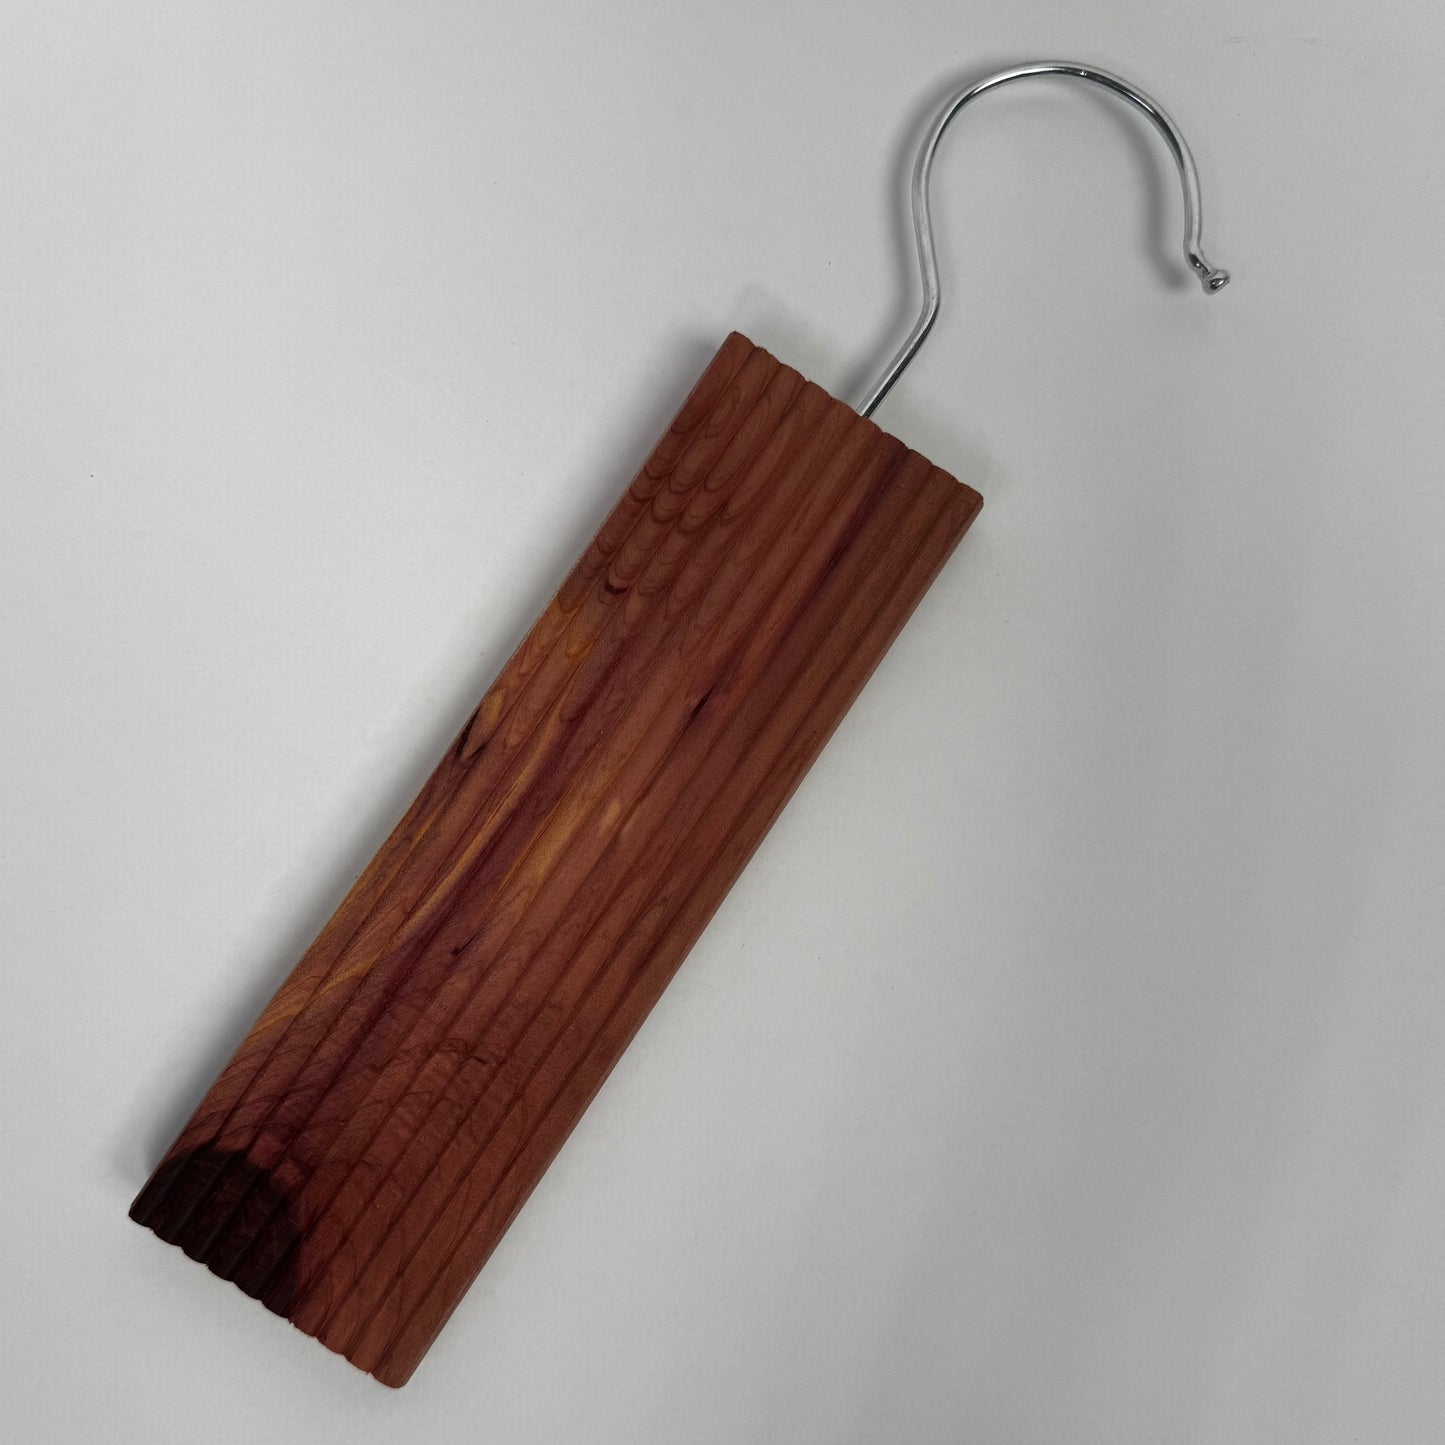 Scented Cedar Wood Hangups with Hook for Closets on a white background.